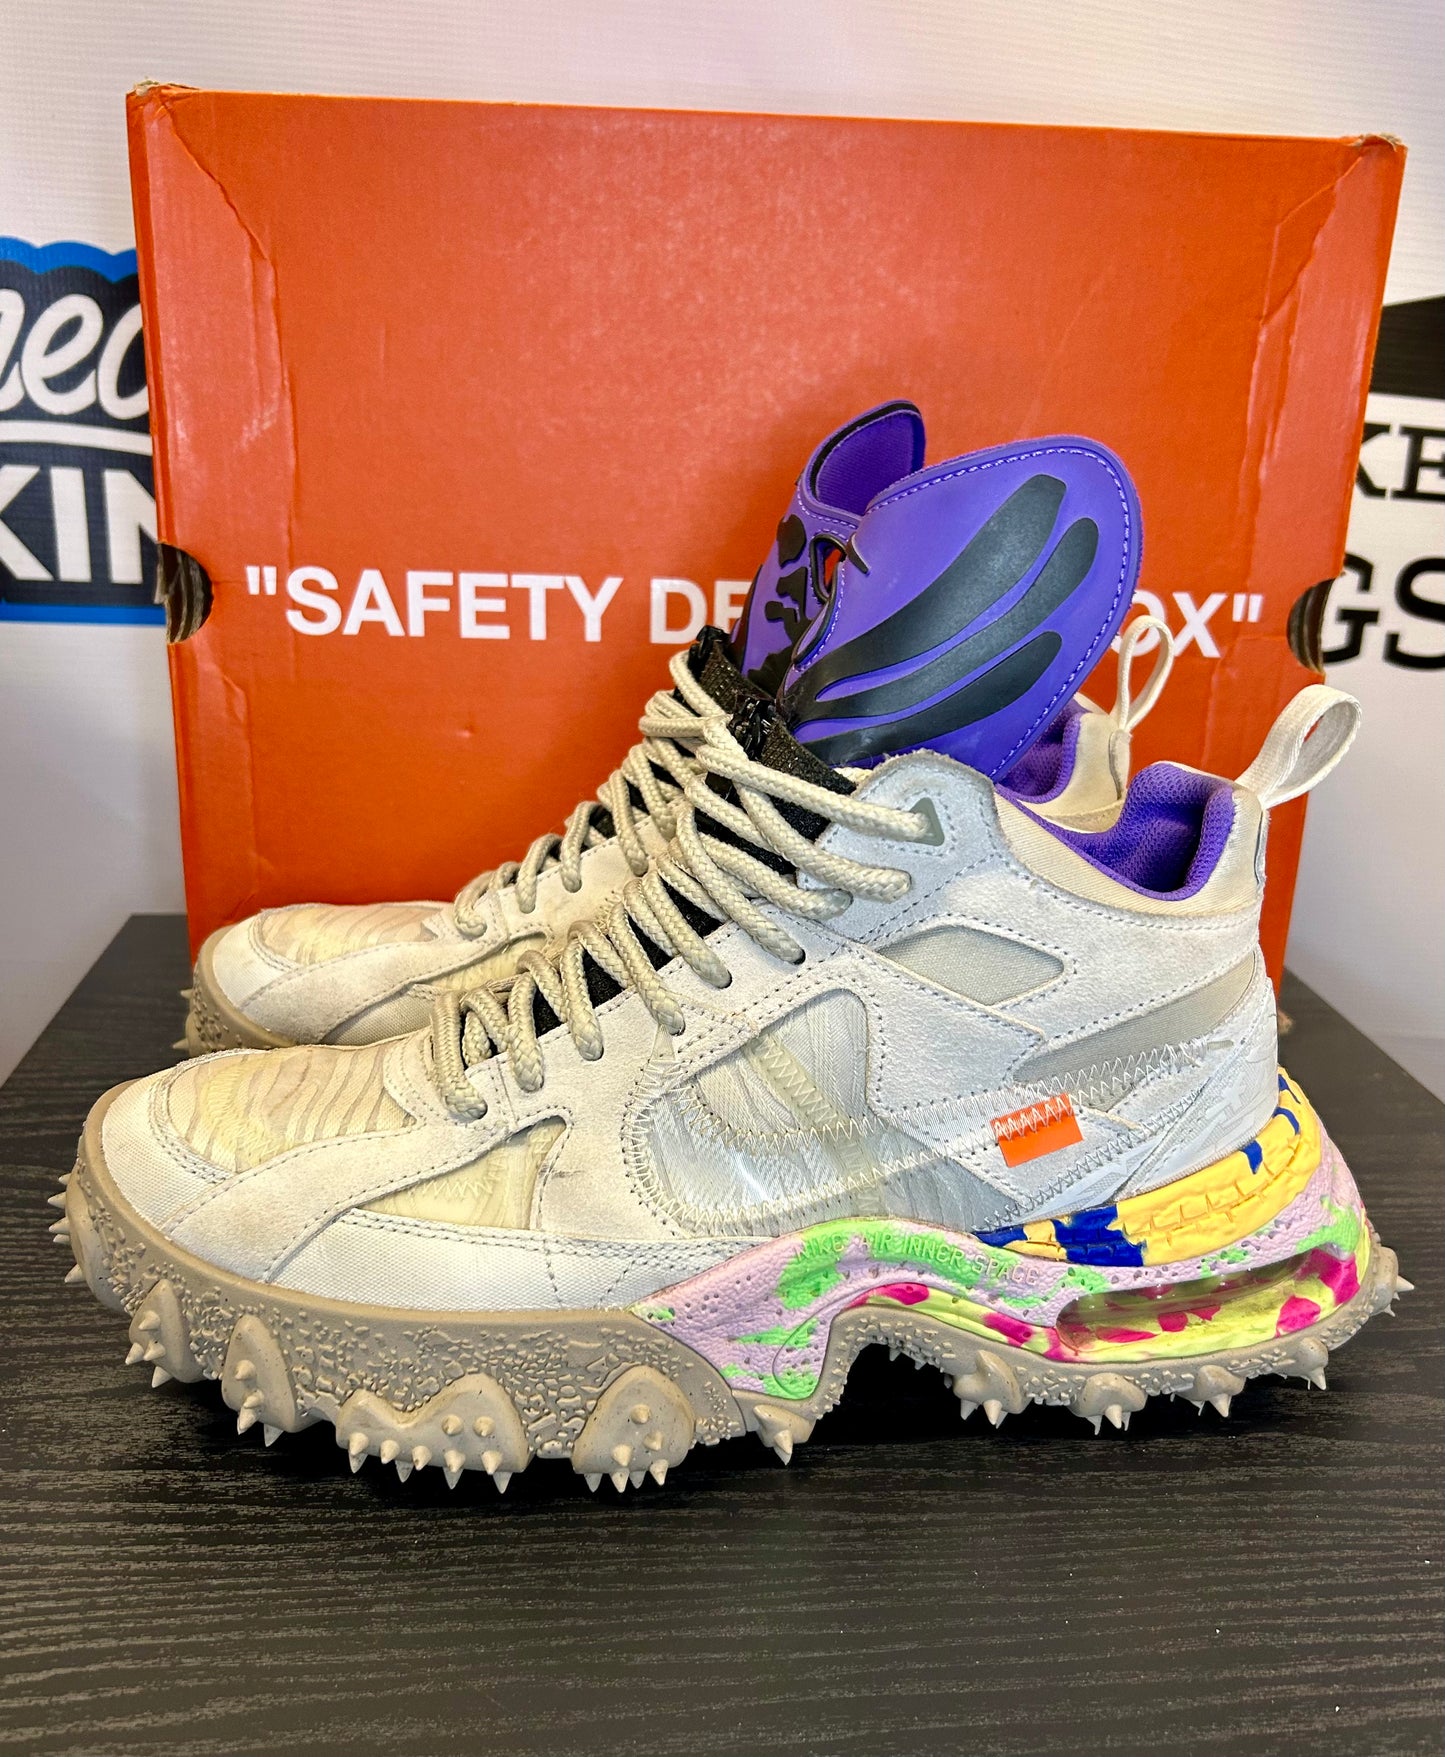 Nike Off-White Air Terra Forma Summit White Psychic Purple (Pre-Owned)